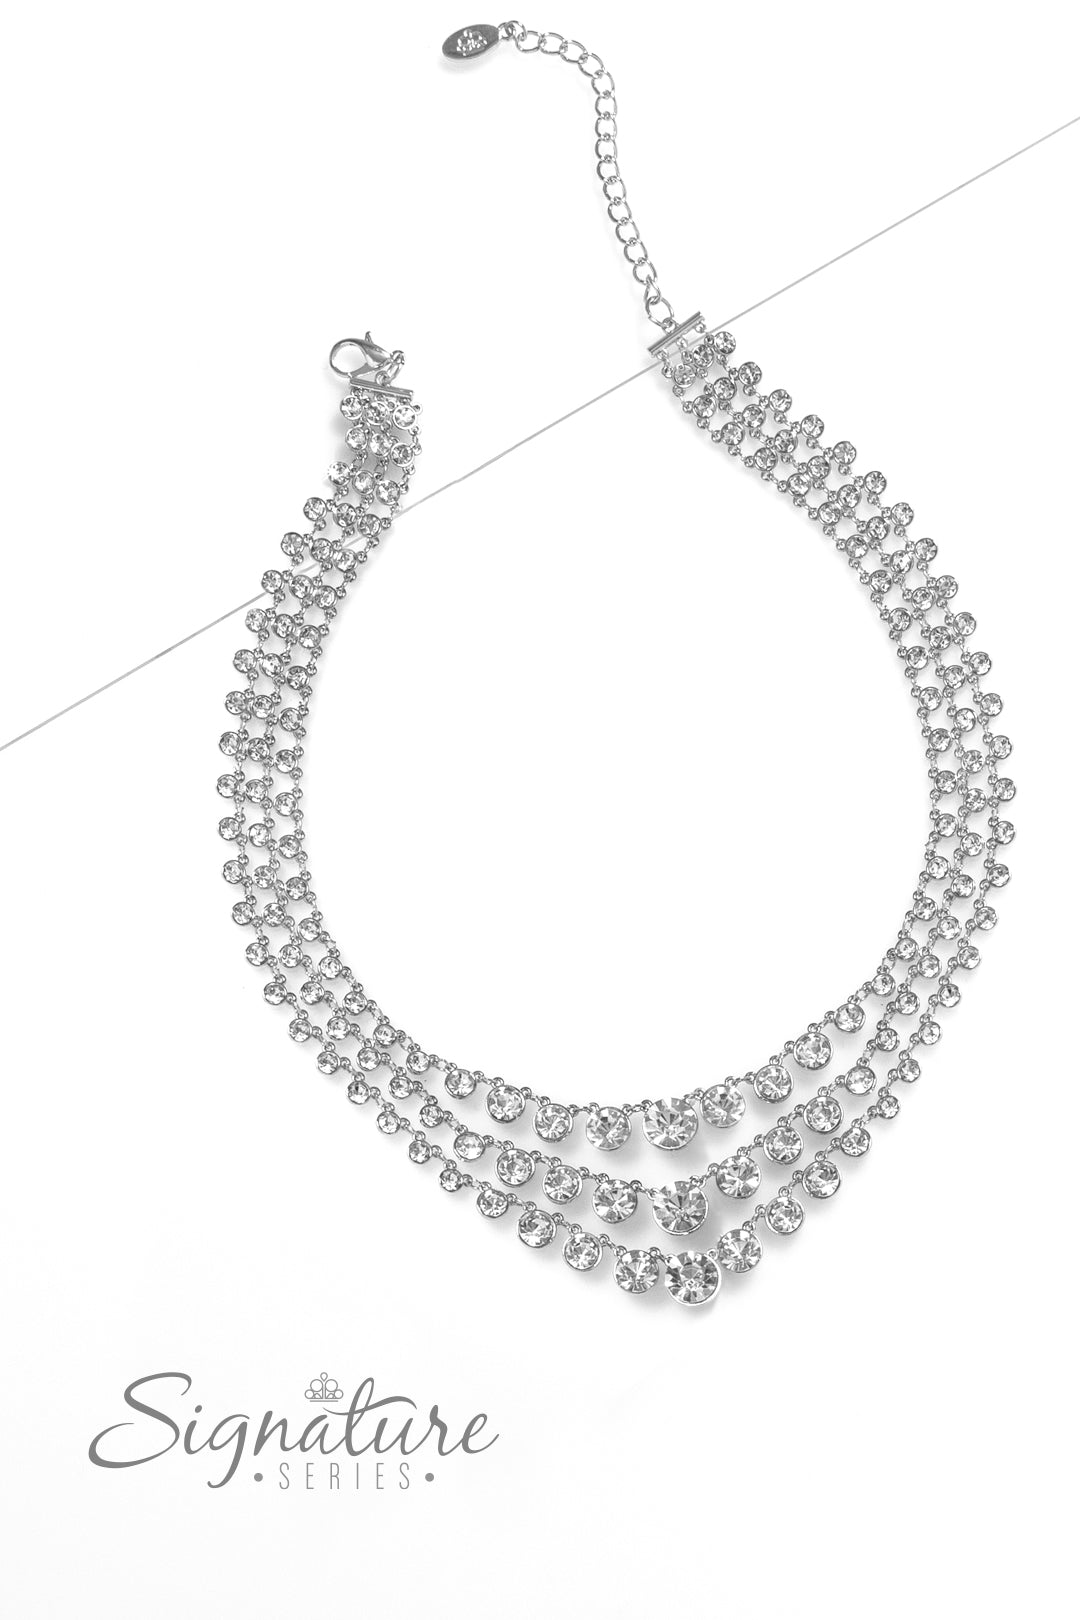 Paparazzi Accessories The Dana Rows of glittery, white rhinestones drape between two sleek silver bars, falling into three luxurious layers. The sparkling gems gradually increase in size as they fall towards the center of the design, adding dazzling dimen